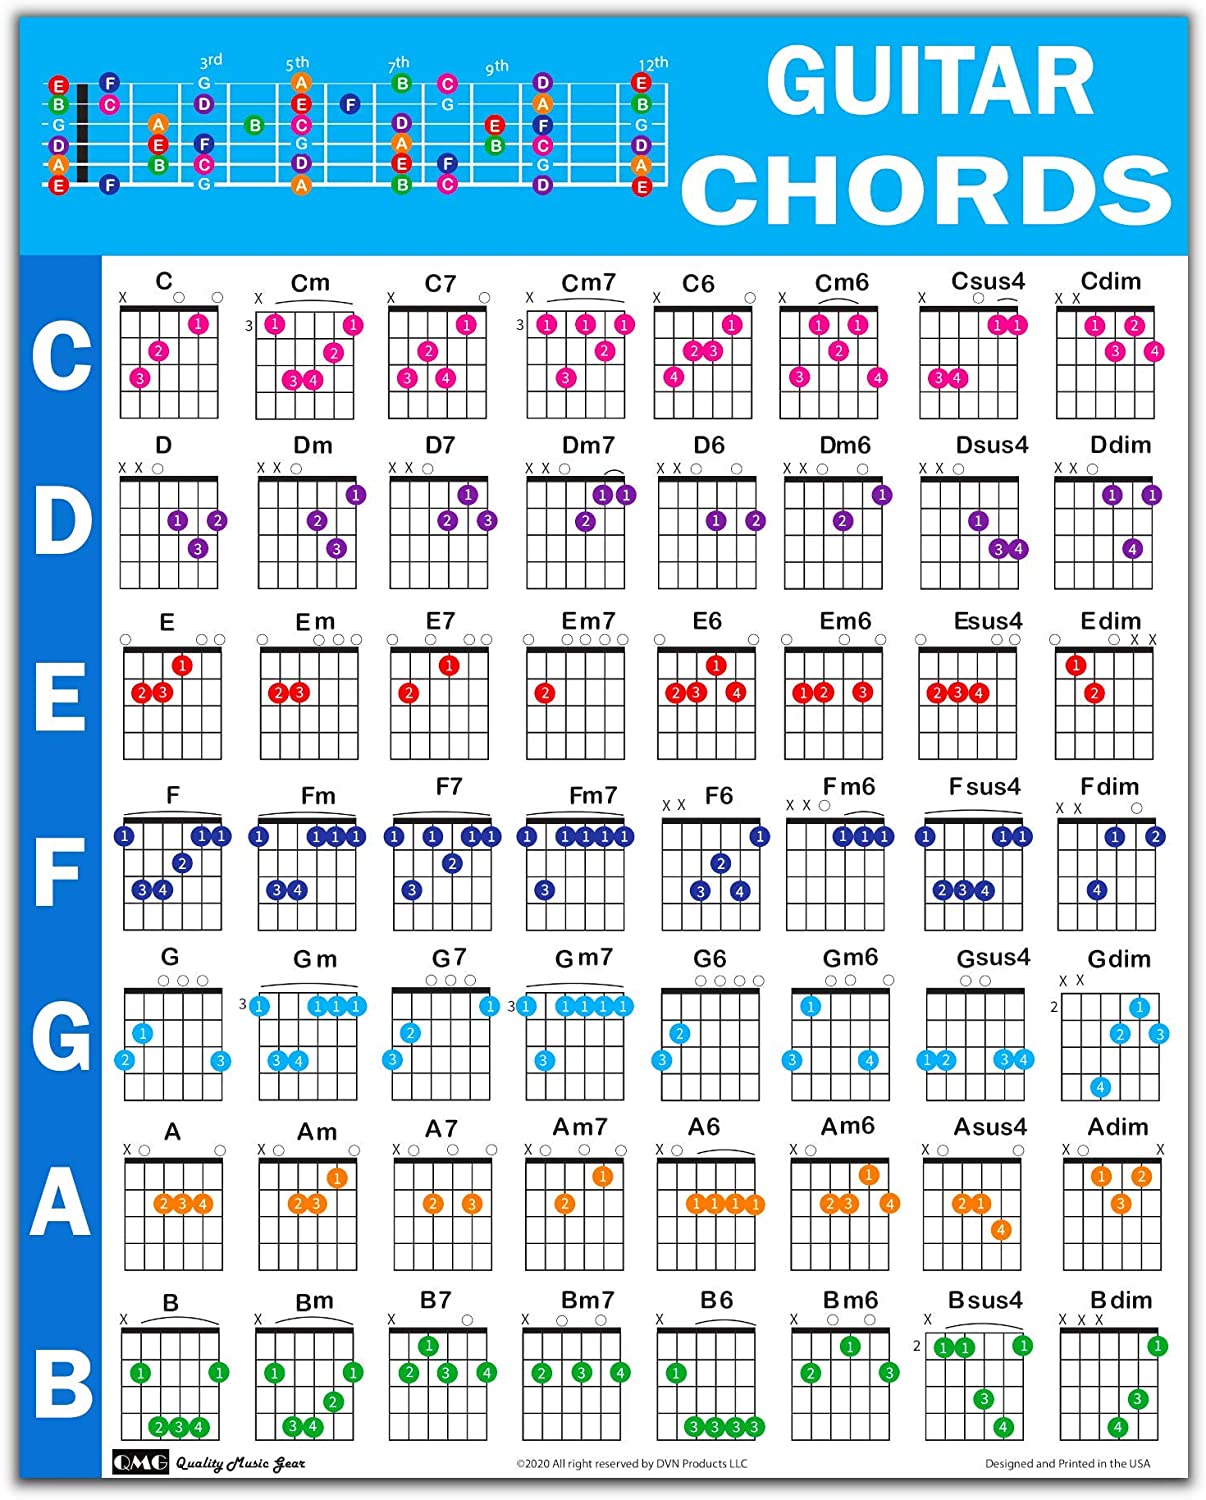 Guitar Chord and Scale Poster Chart, Size 24”x 30” - Quality Music Gear